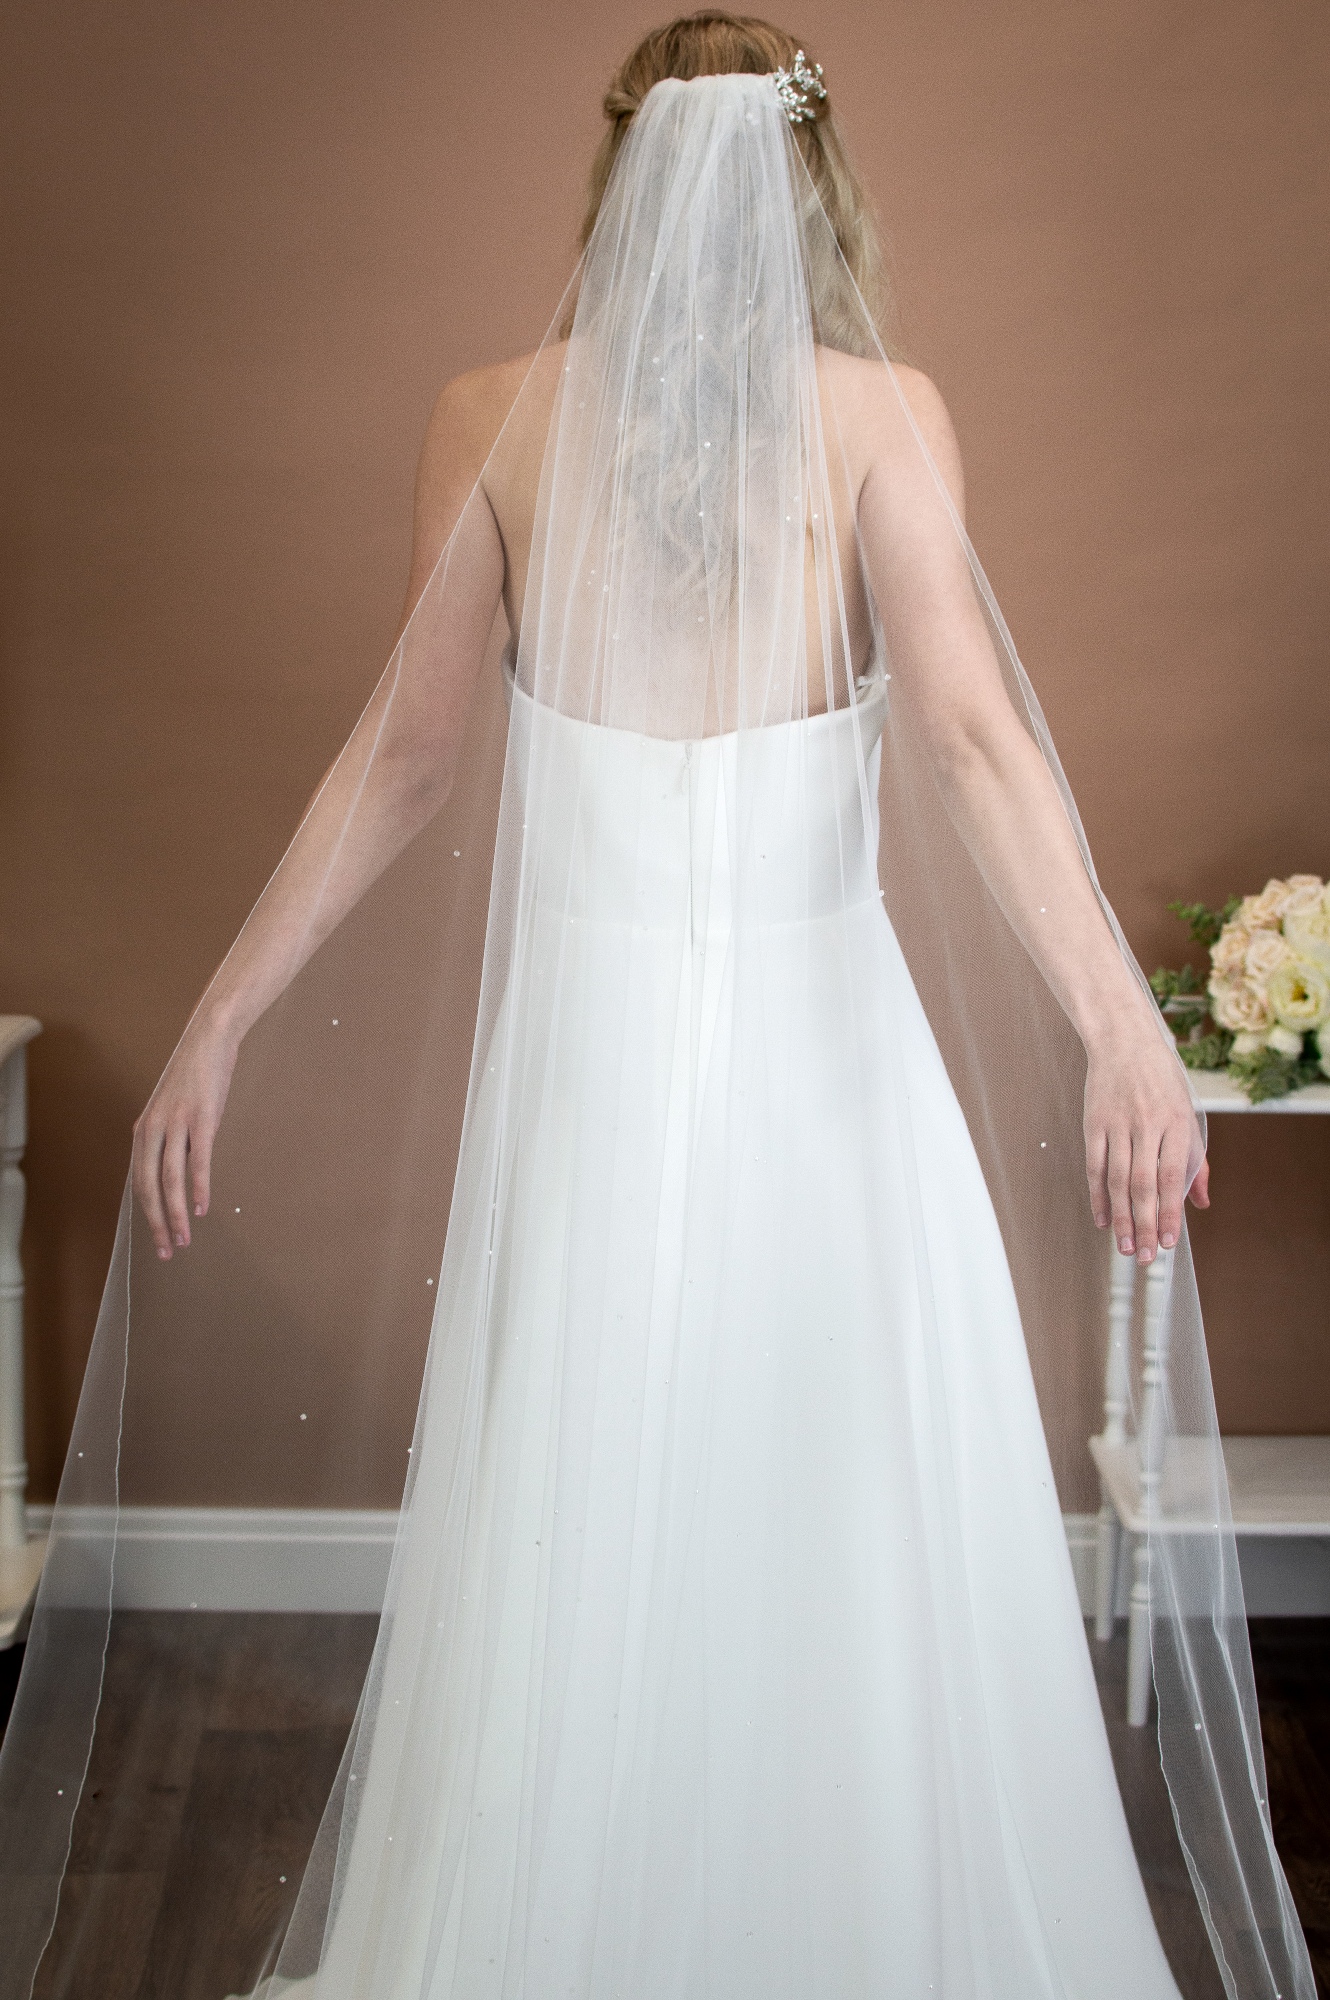 Alexis cathedral length veil